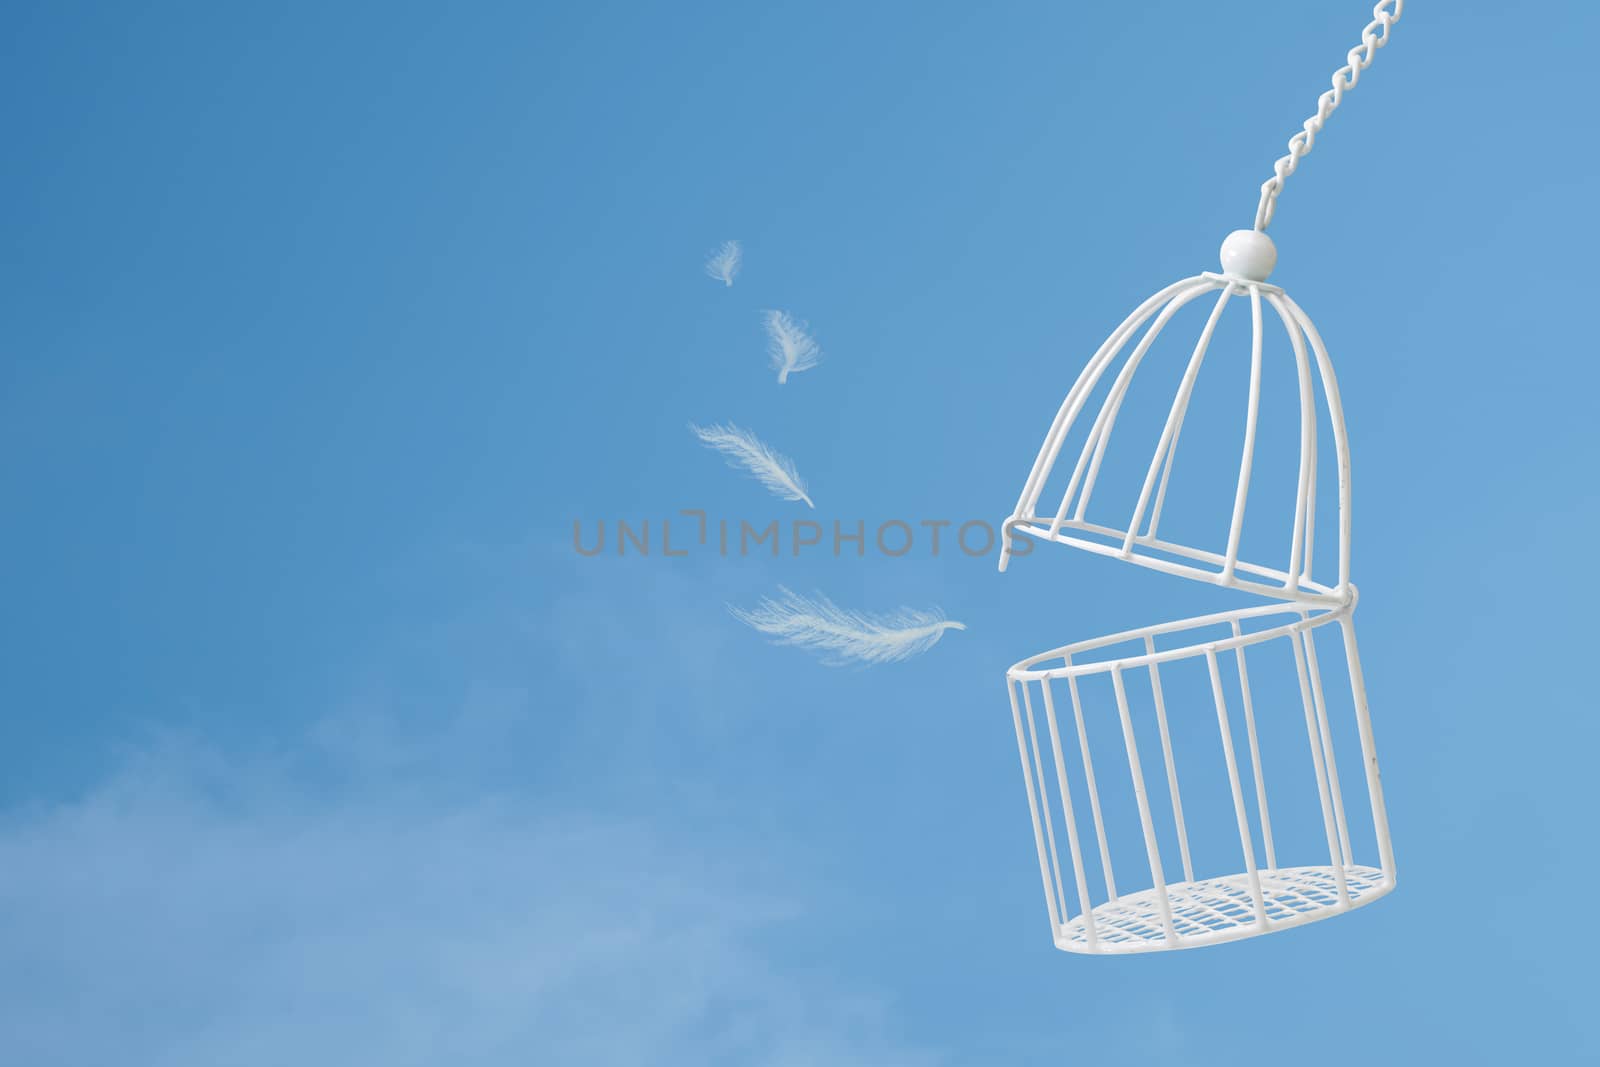 White feathers floating outside bird cage on  blue sky with cloud background, idea concept of freedom.